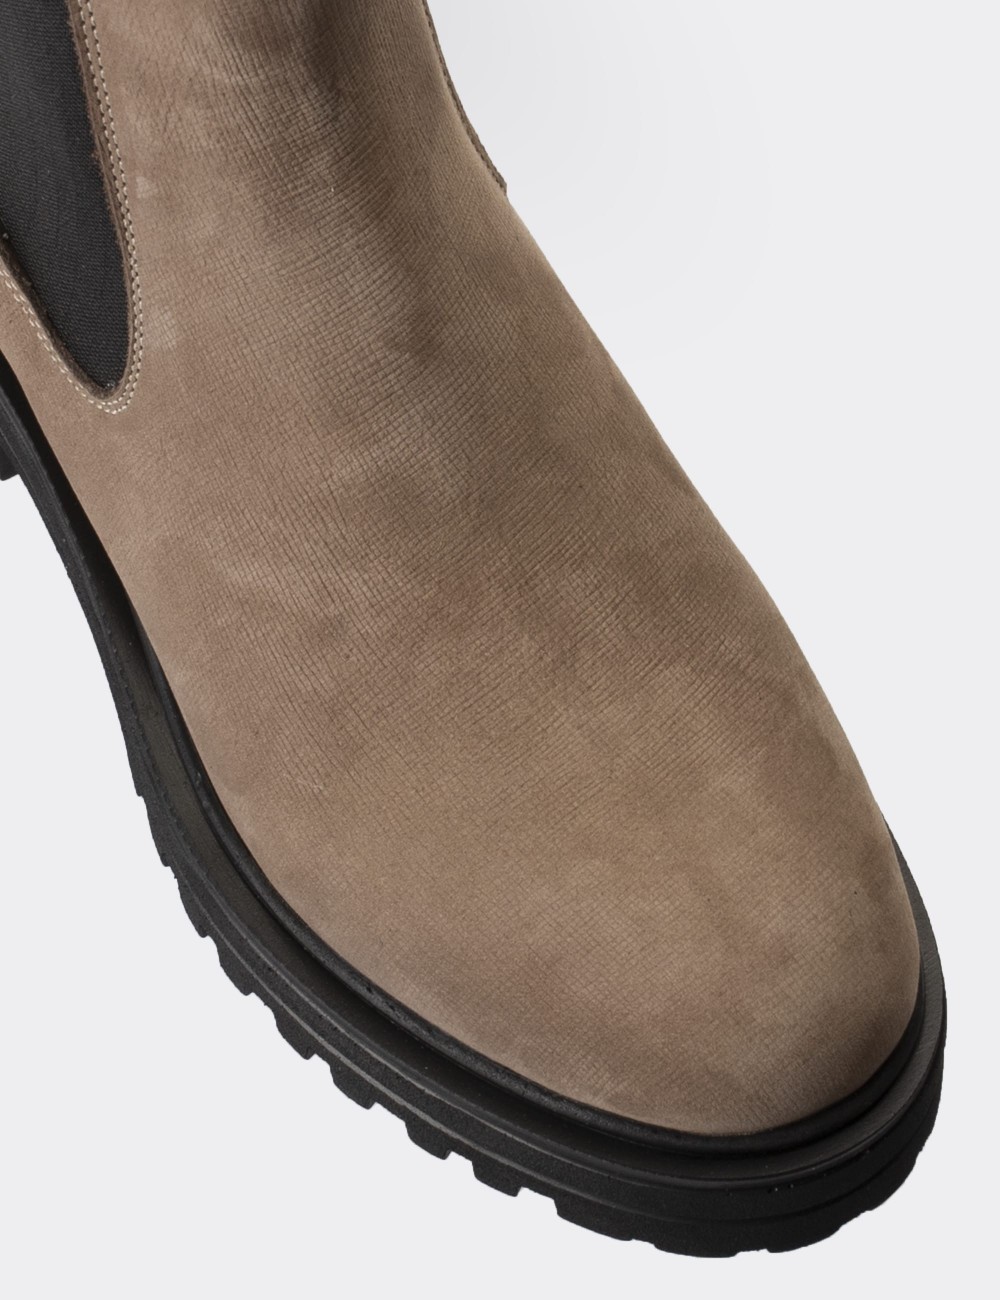 Sandstone Suede Leather Chelsea Boots - 01801ZVZNE01